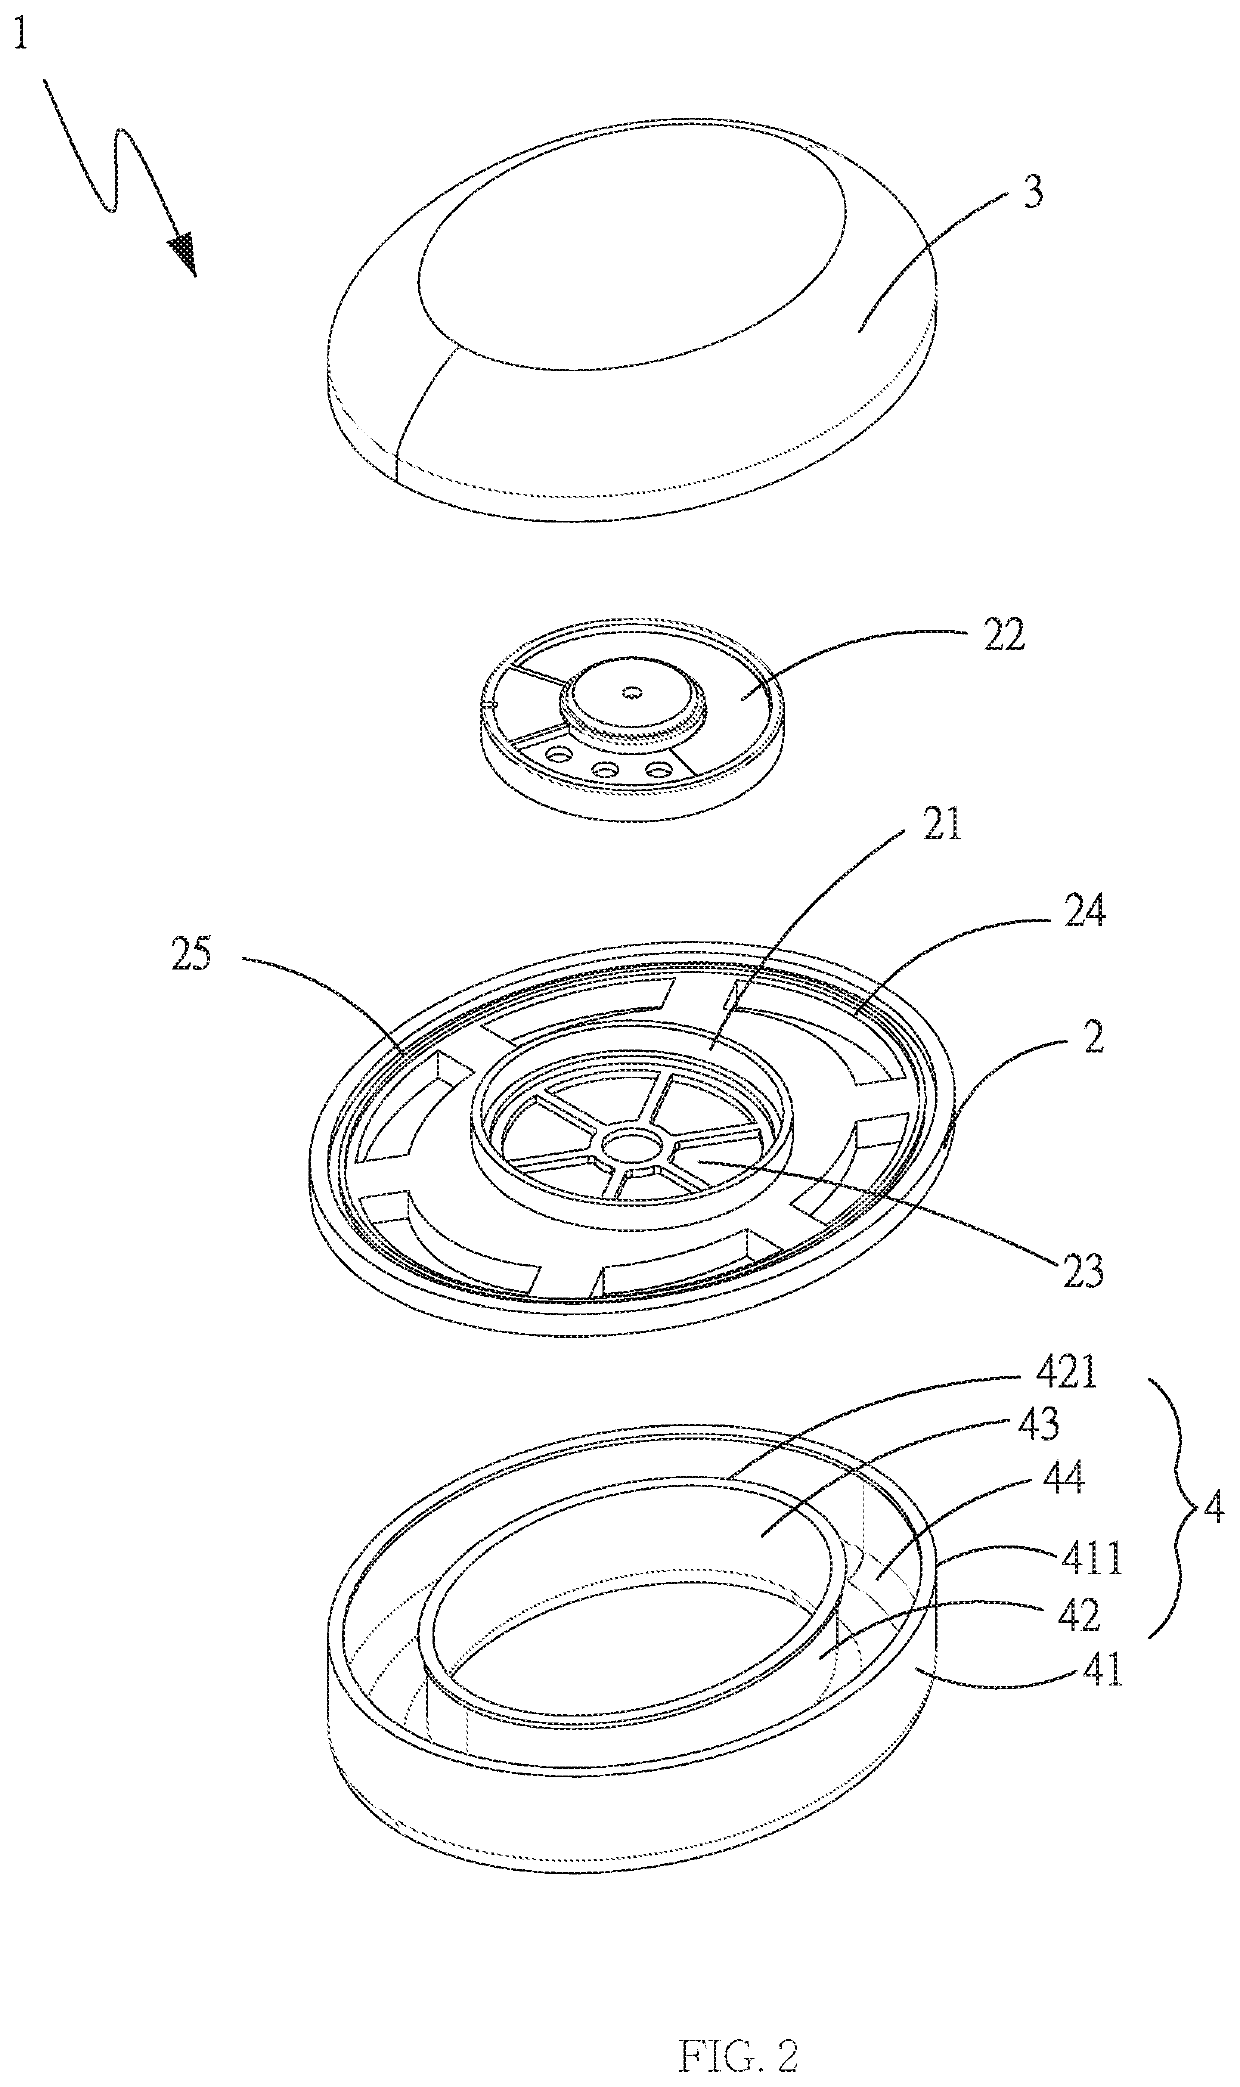 Headphone structure for extending and enhancing resonance